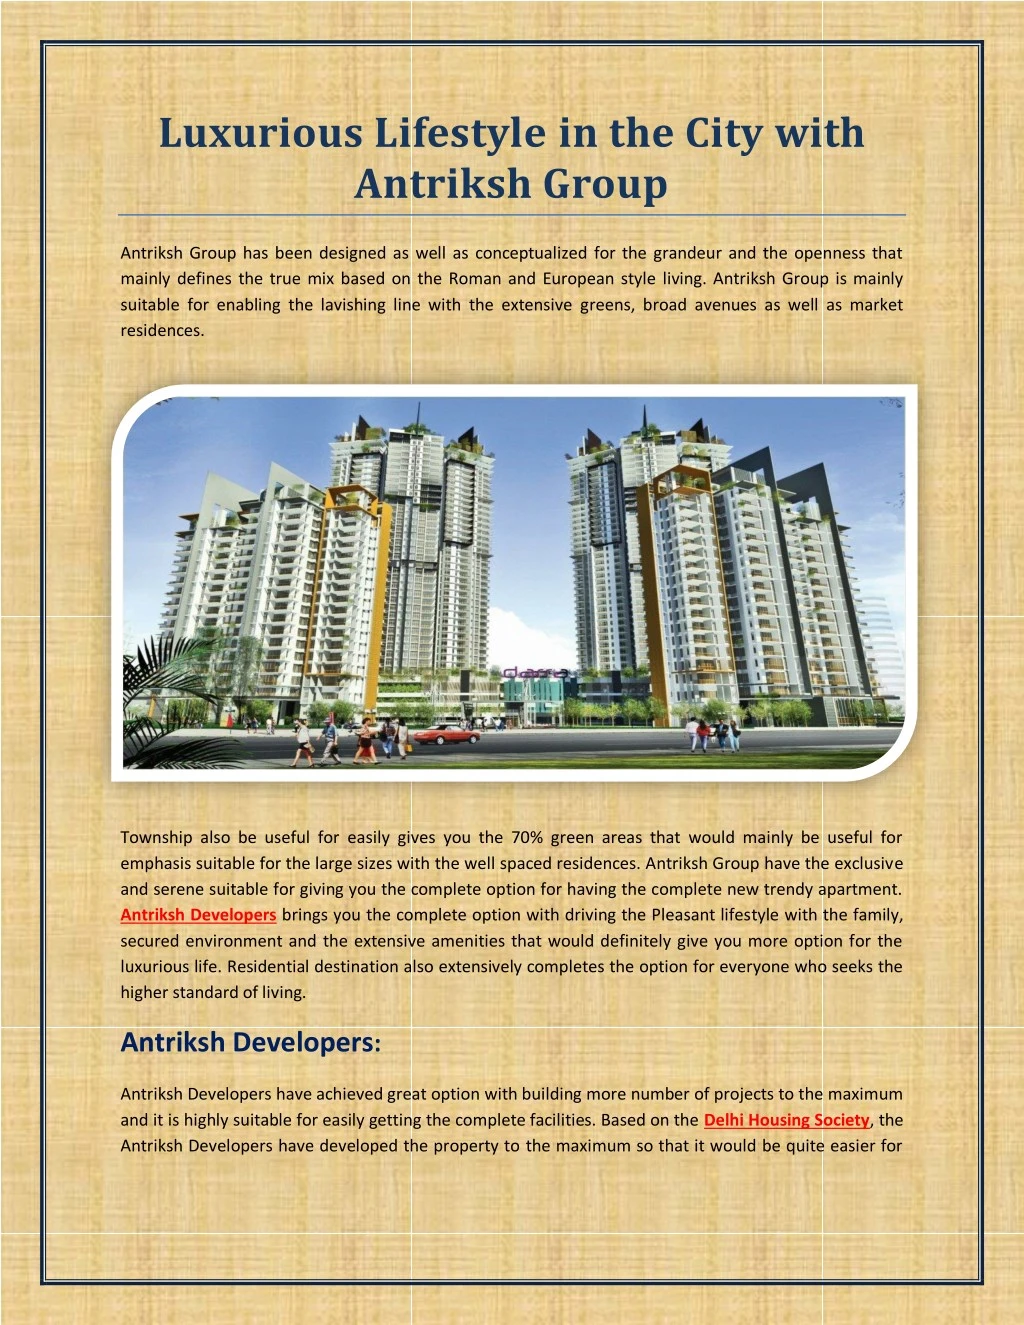 luxurious lifestyle in the city with antriksh